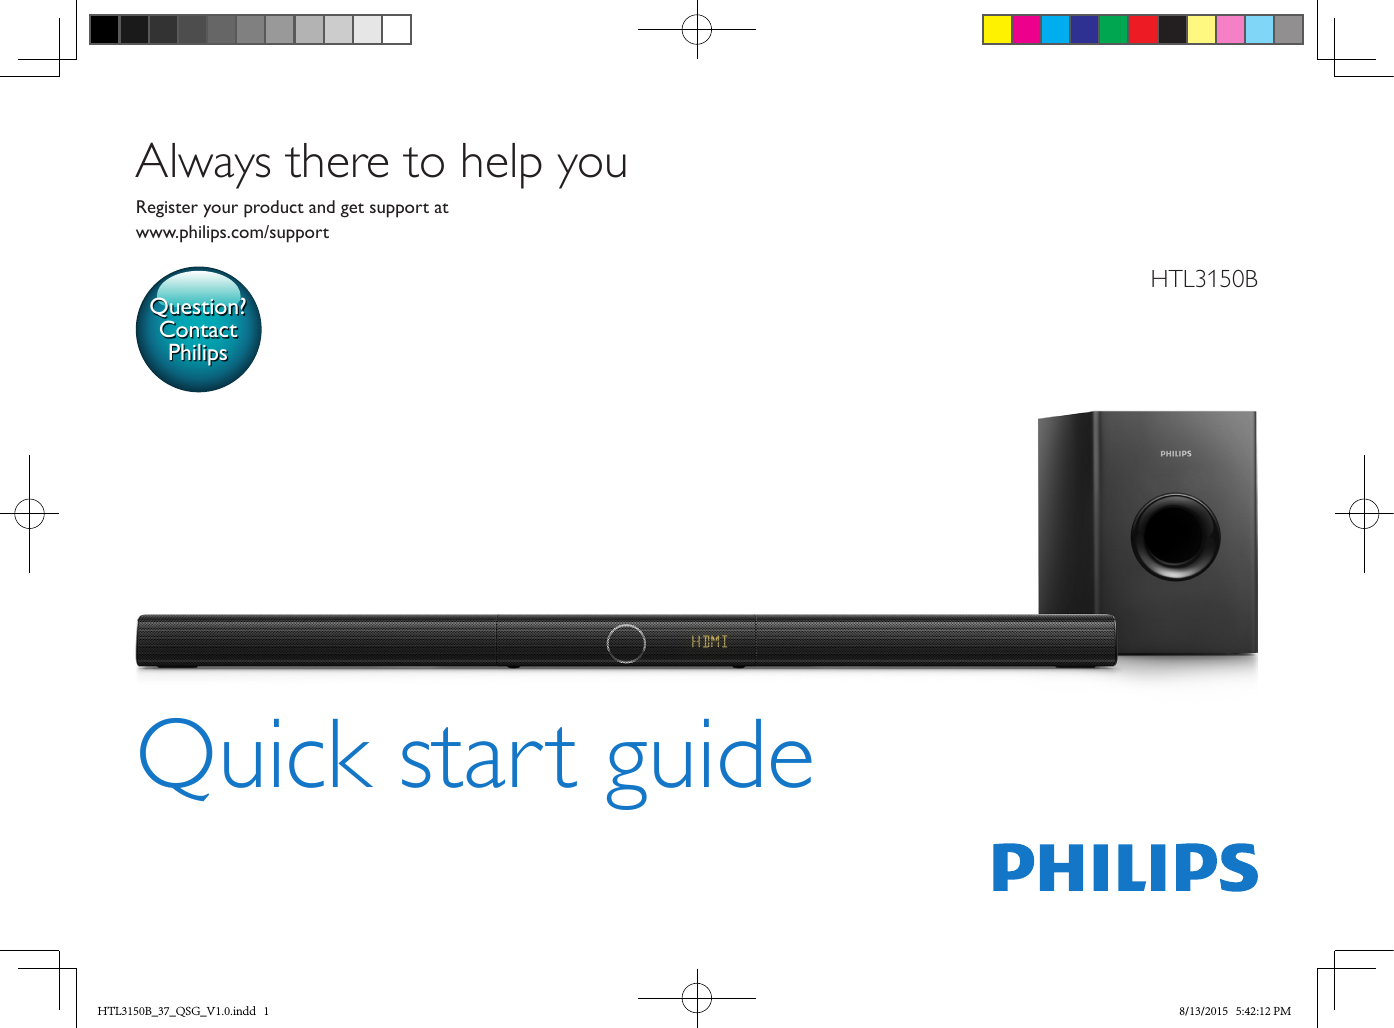 HTL3150BQuick start guideRegister your product and get support atwww.philips.com/supportAlways there to help youQuestion?Contact PhilipsHTL3150B_37_QSG_V1.0.indd   1 8/13/2015   5:42:12 PM